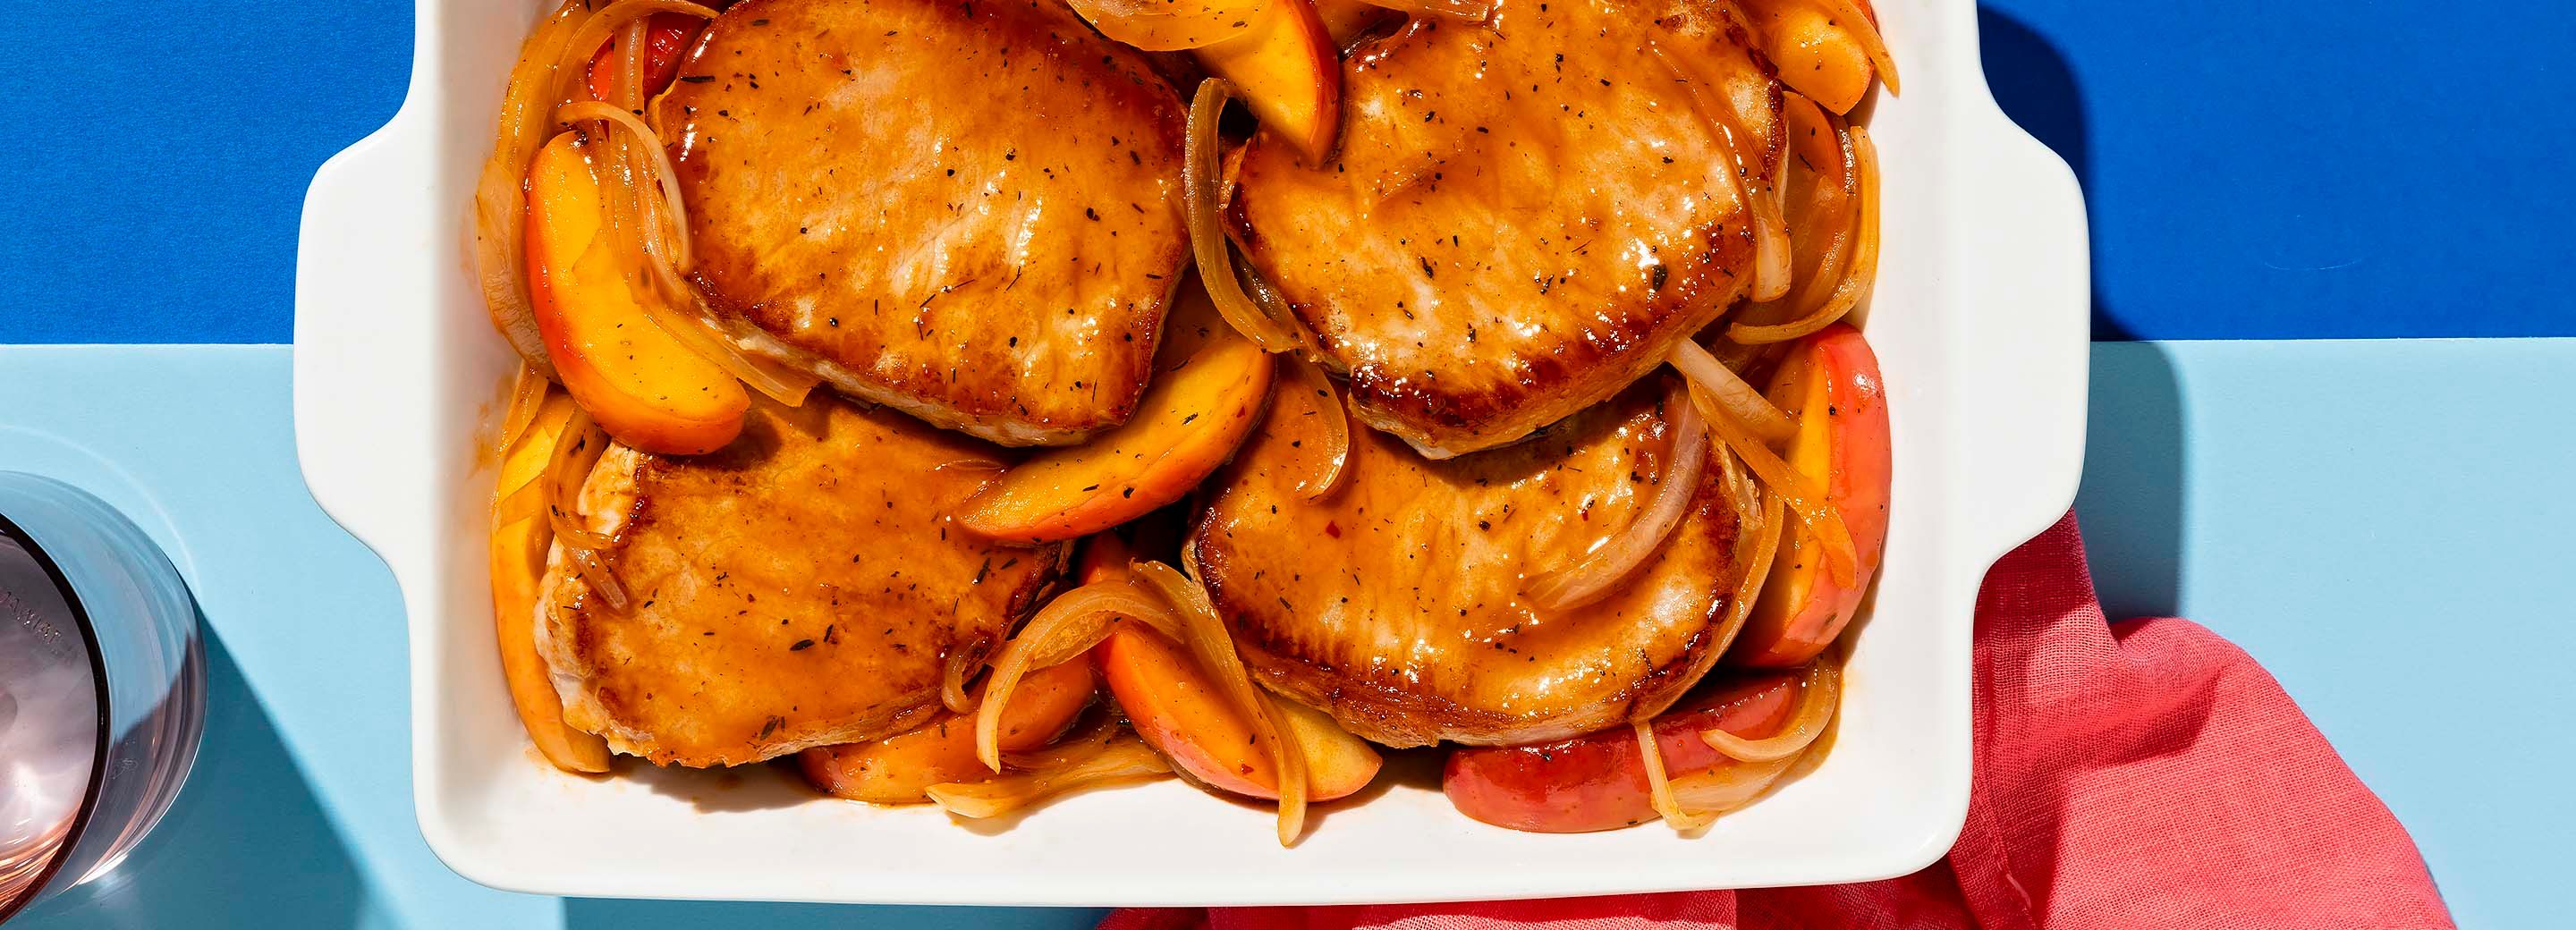 BBQ Slow Cooker Pork Chops and Apples